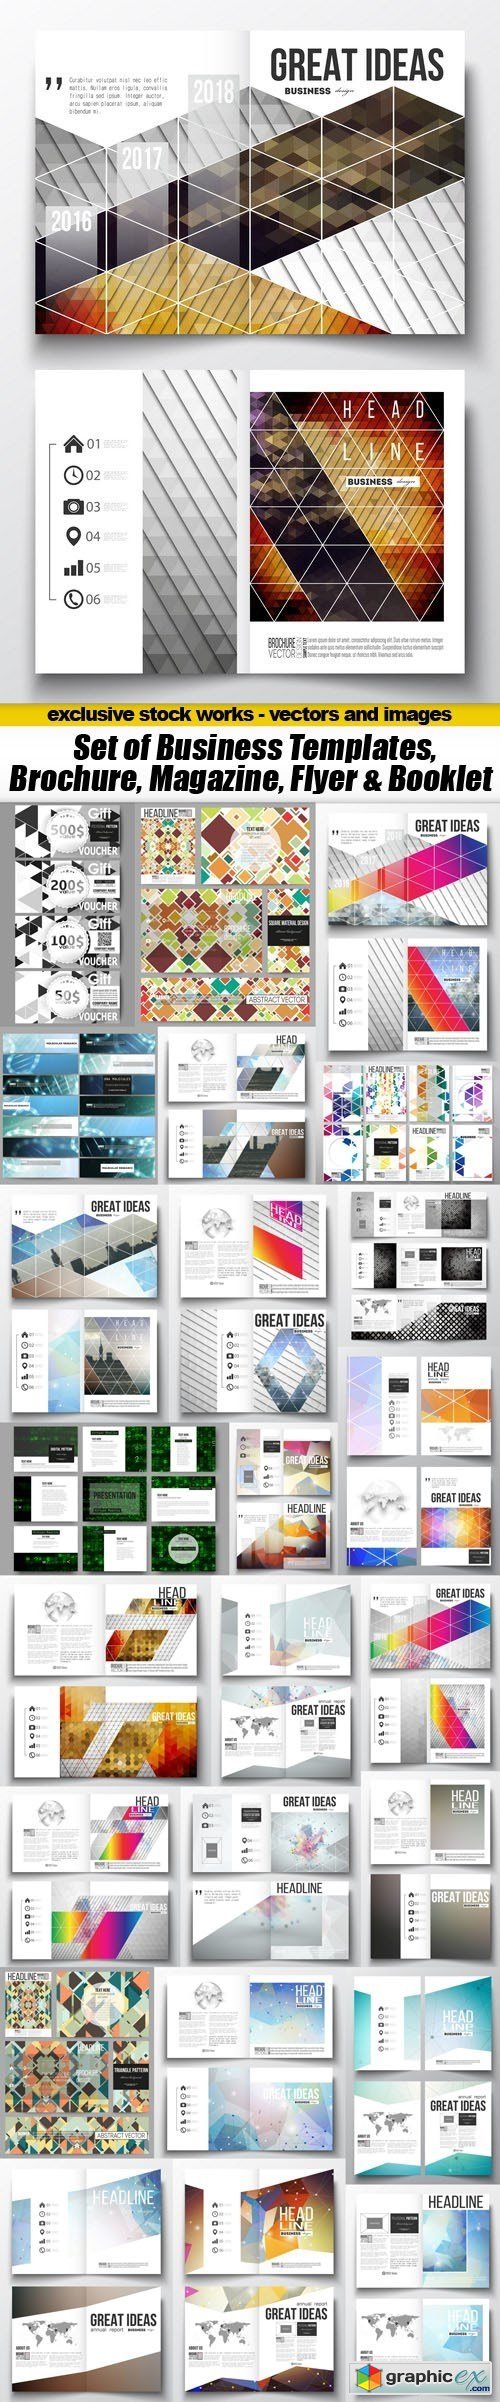 Set of Business Templates, Brochure, Magazine, Flyer & Booklet - 25xEPS